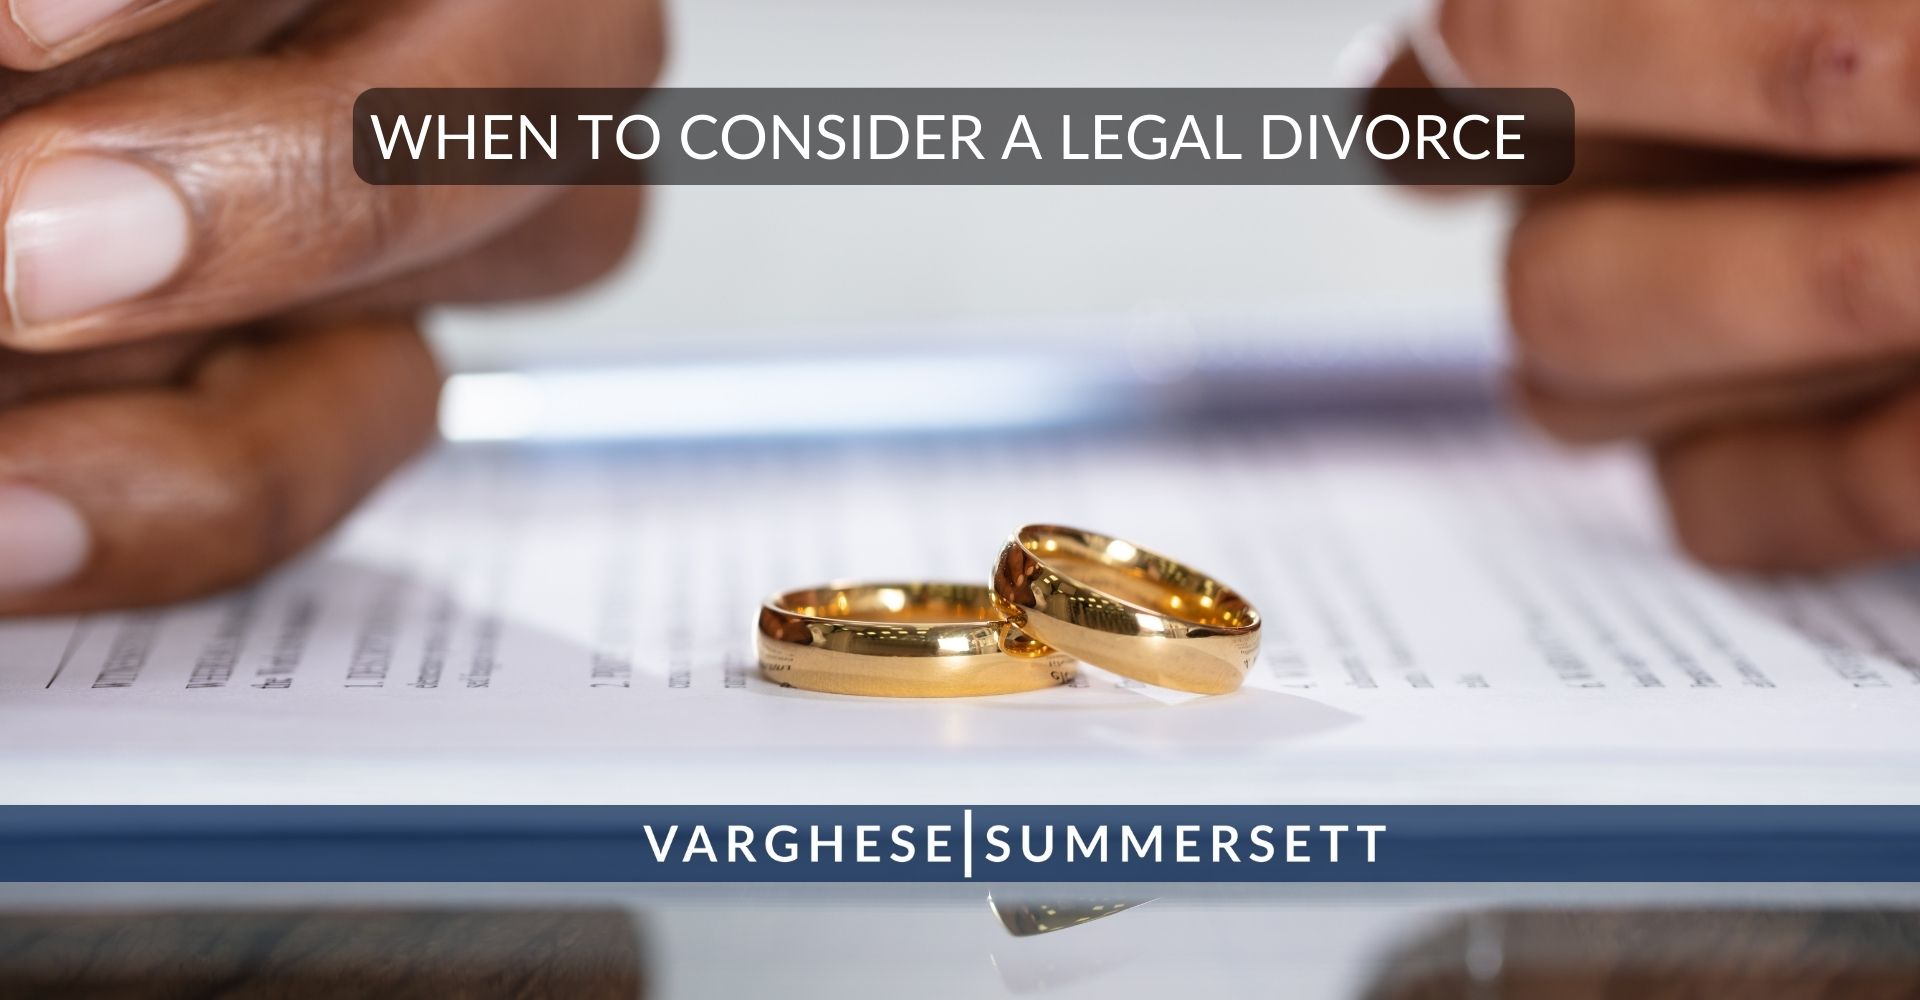 When to Consider a Legal Divorce